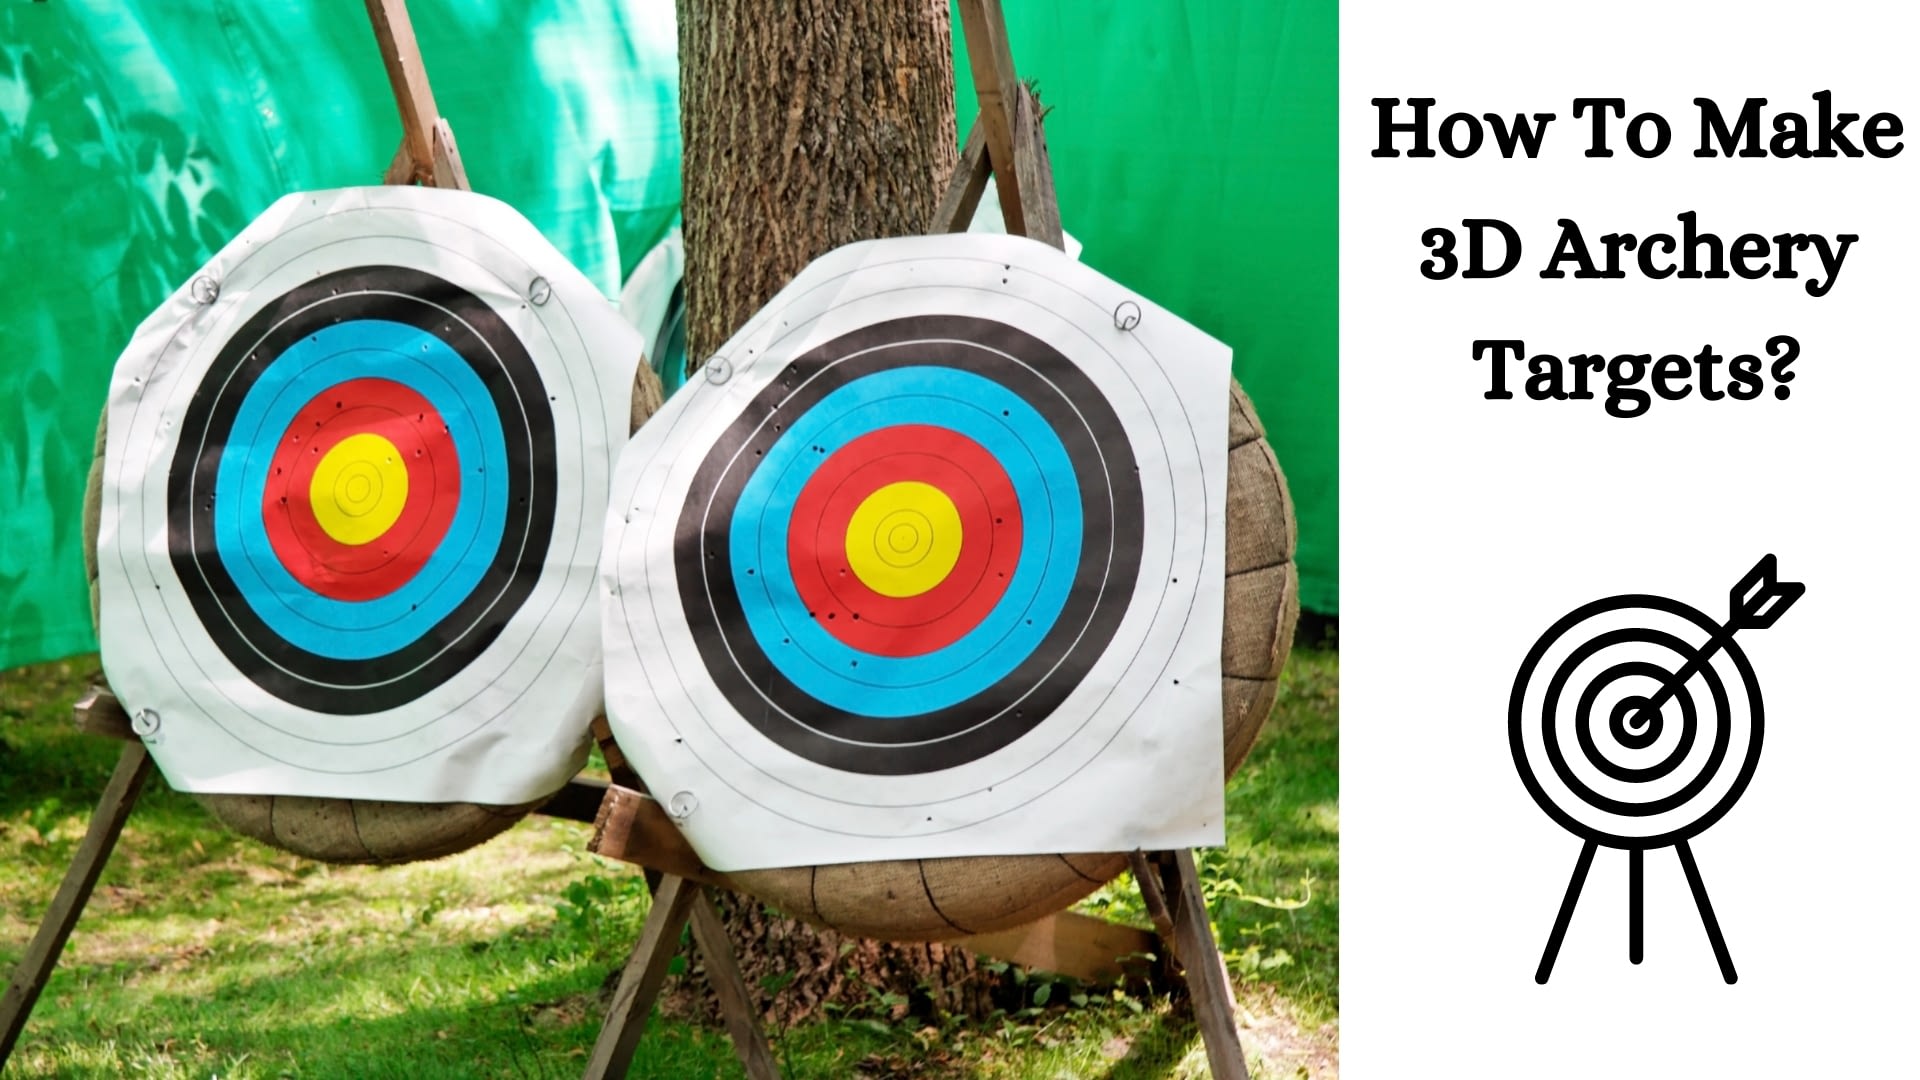 How To Make 3D Archery Targets